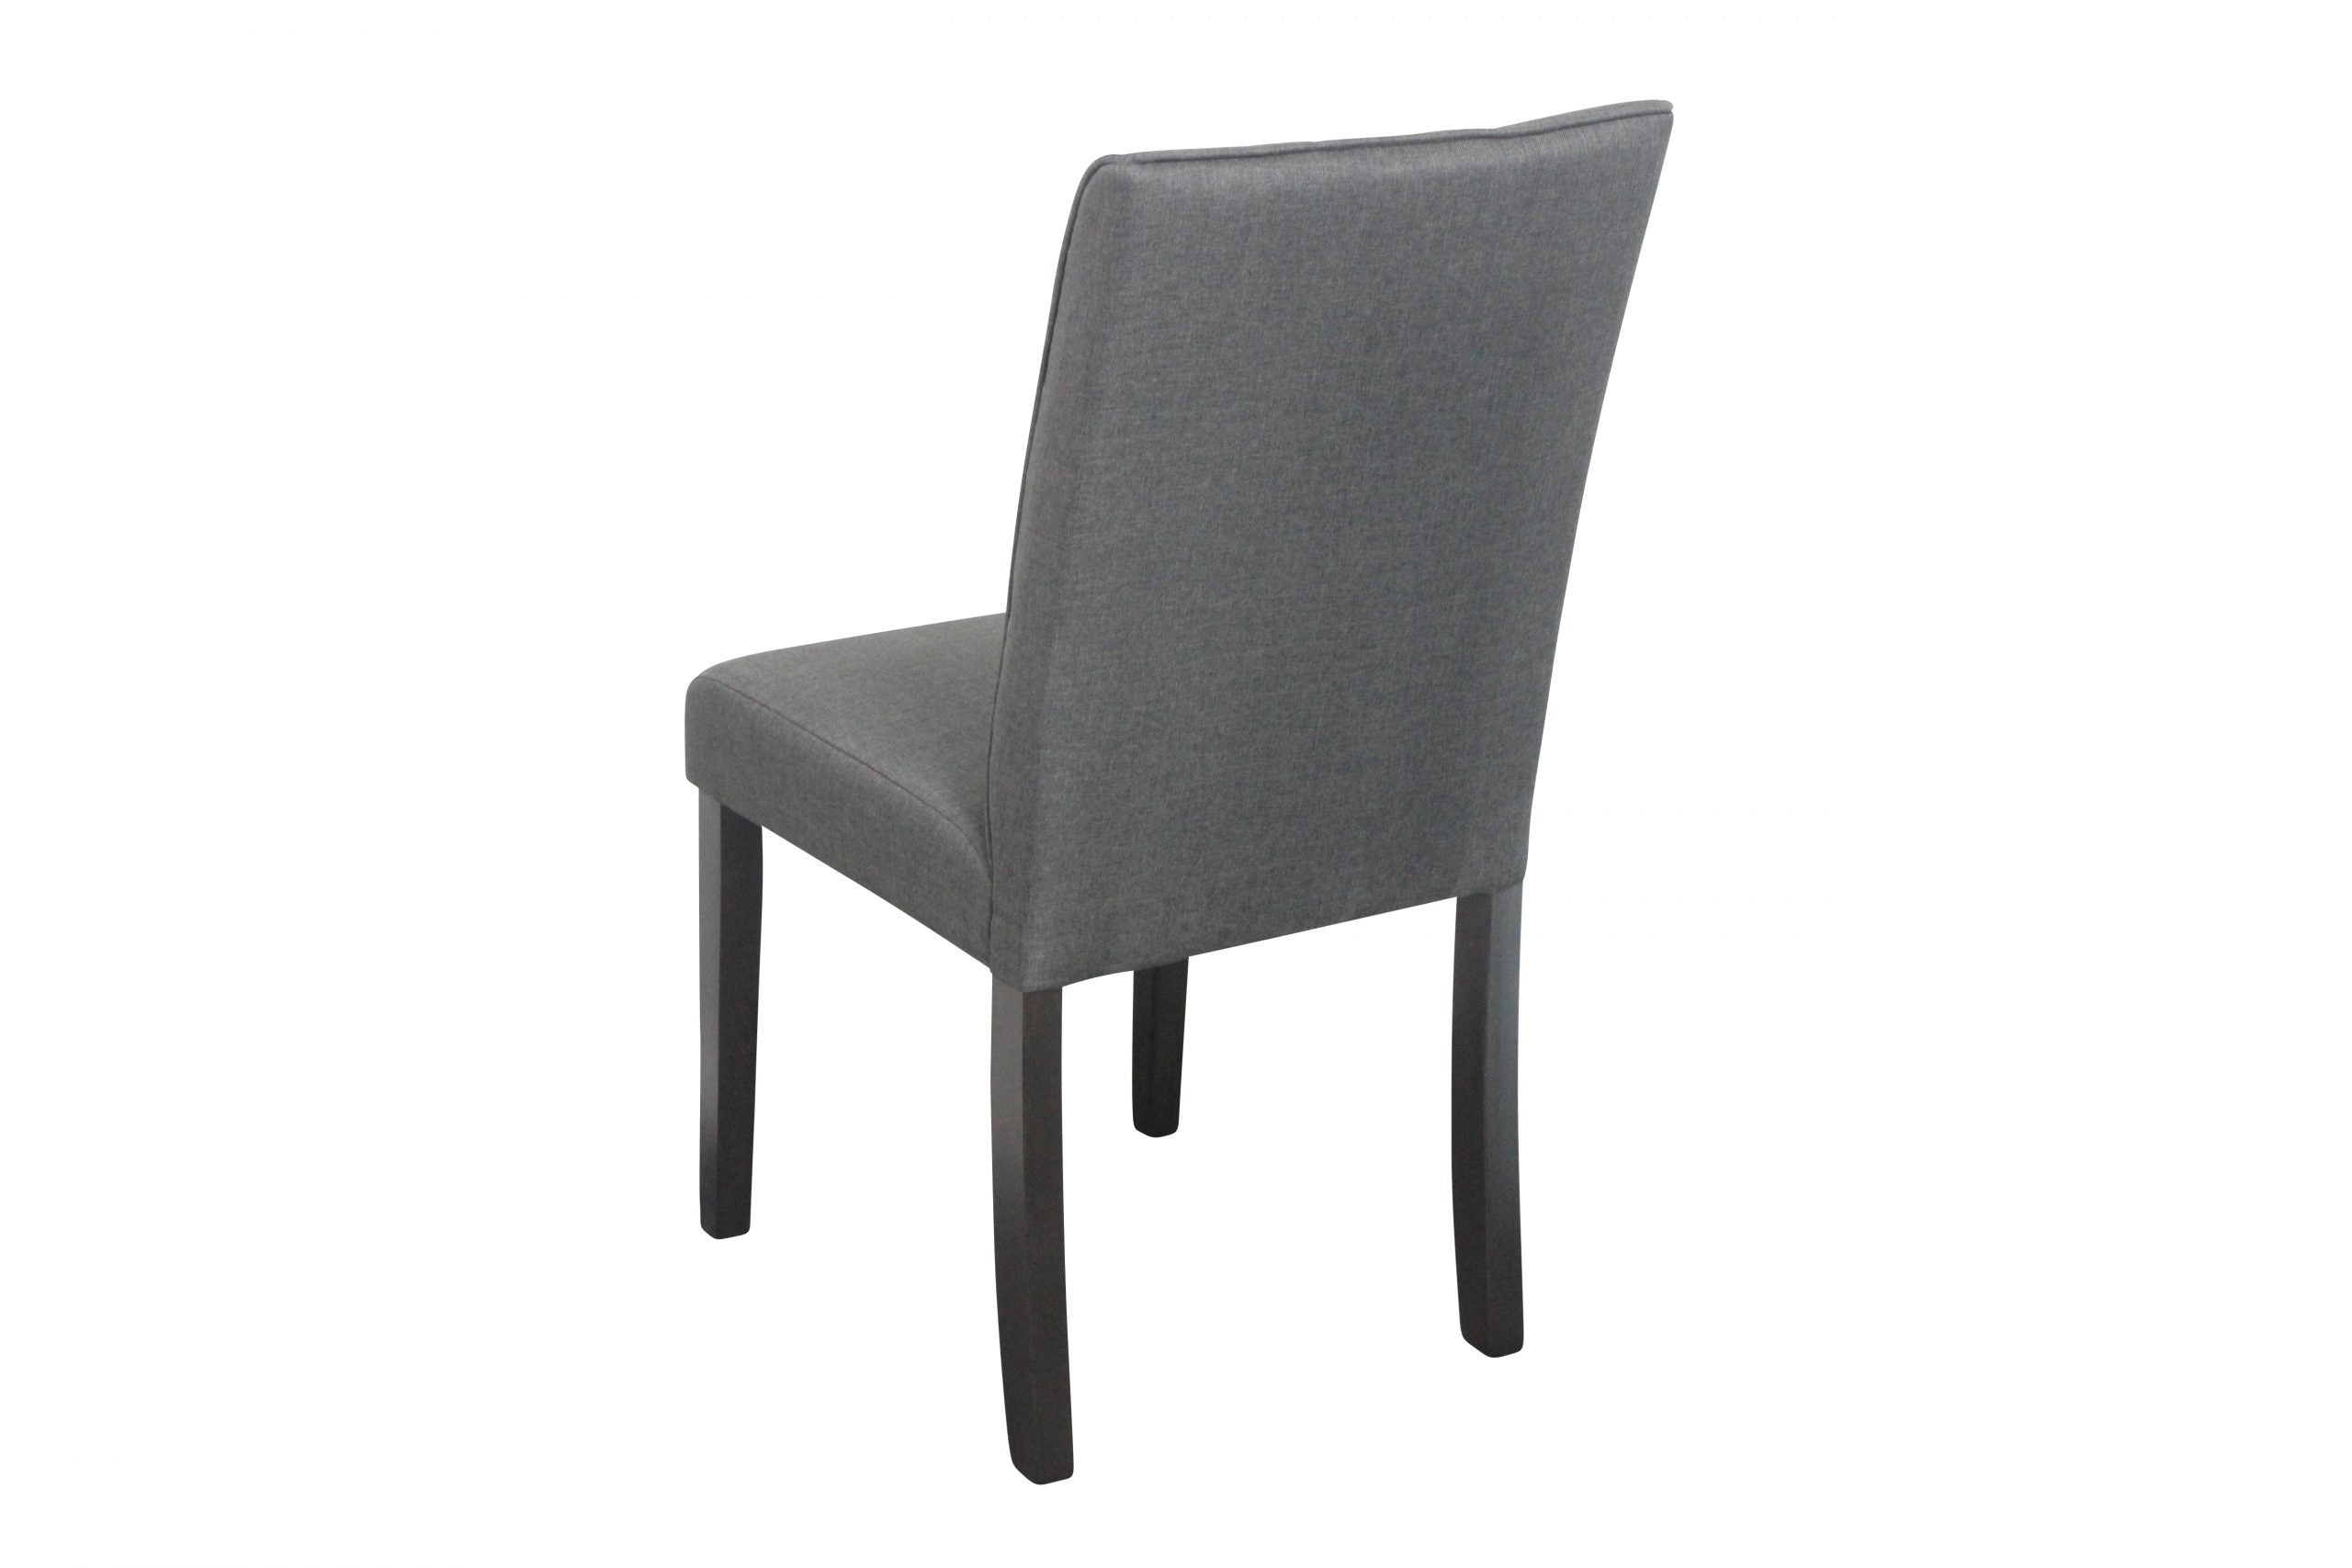 BT Lodge Fabric Upholstered Espresso Leg Dining Chair